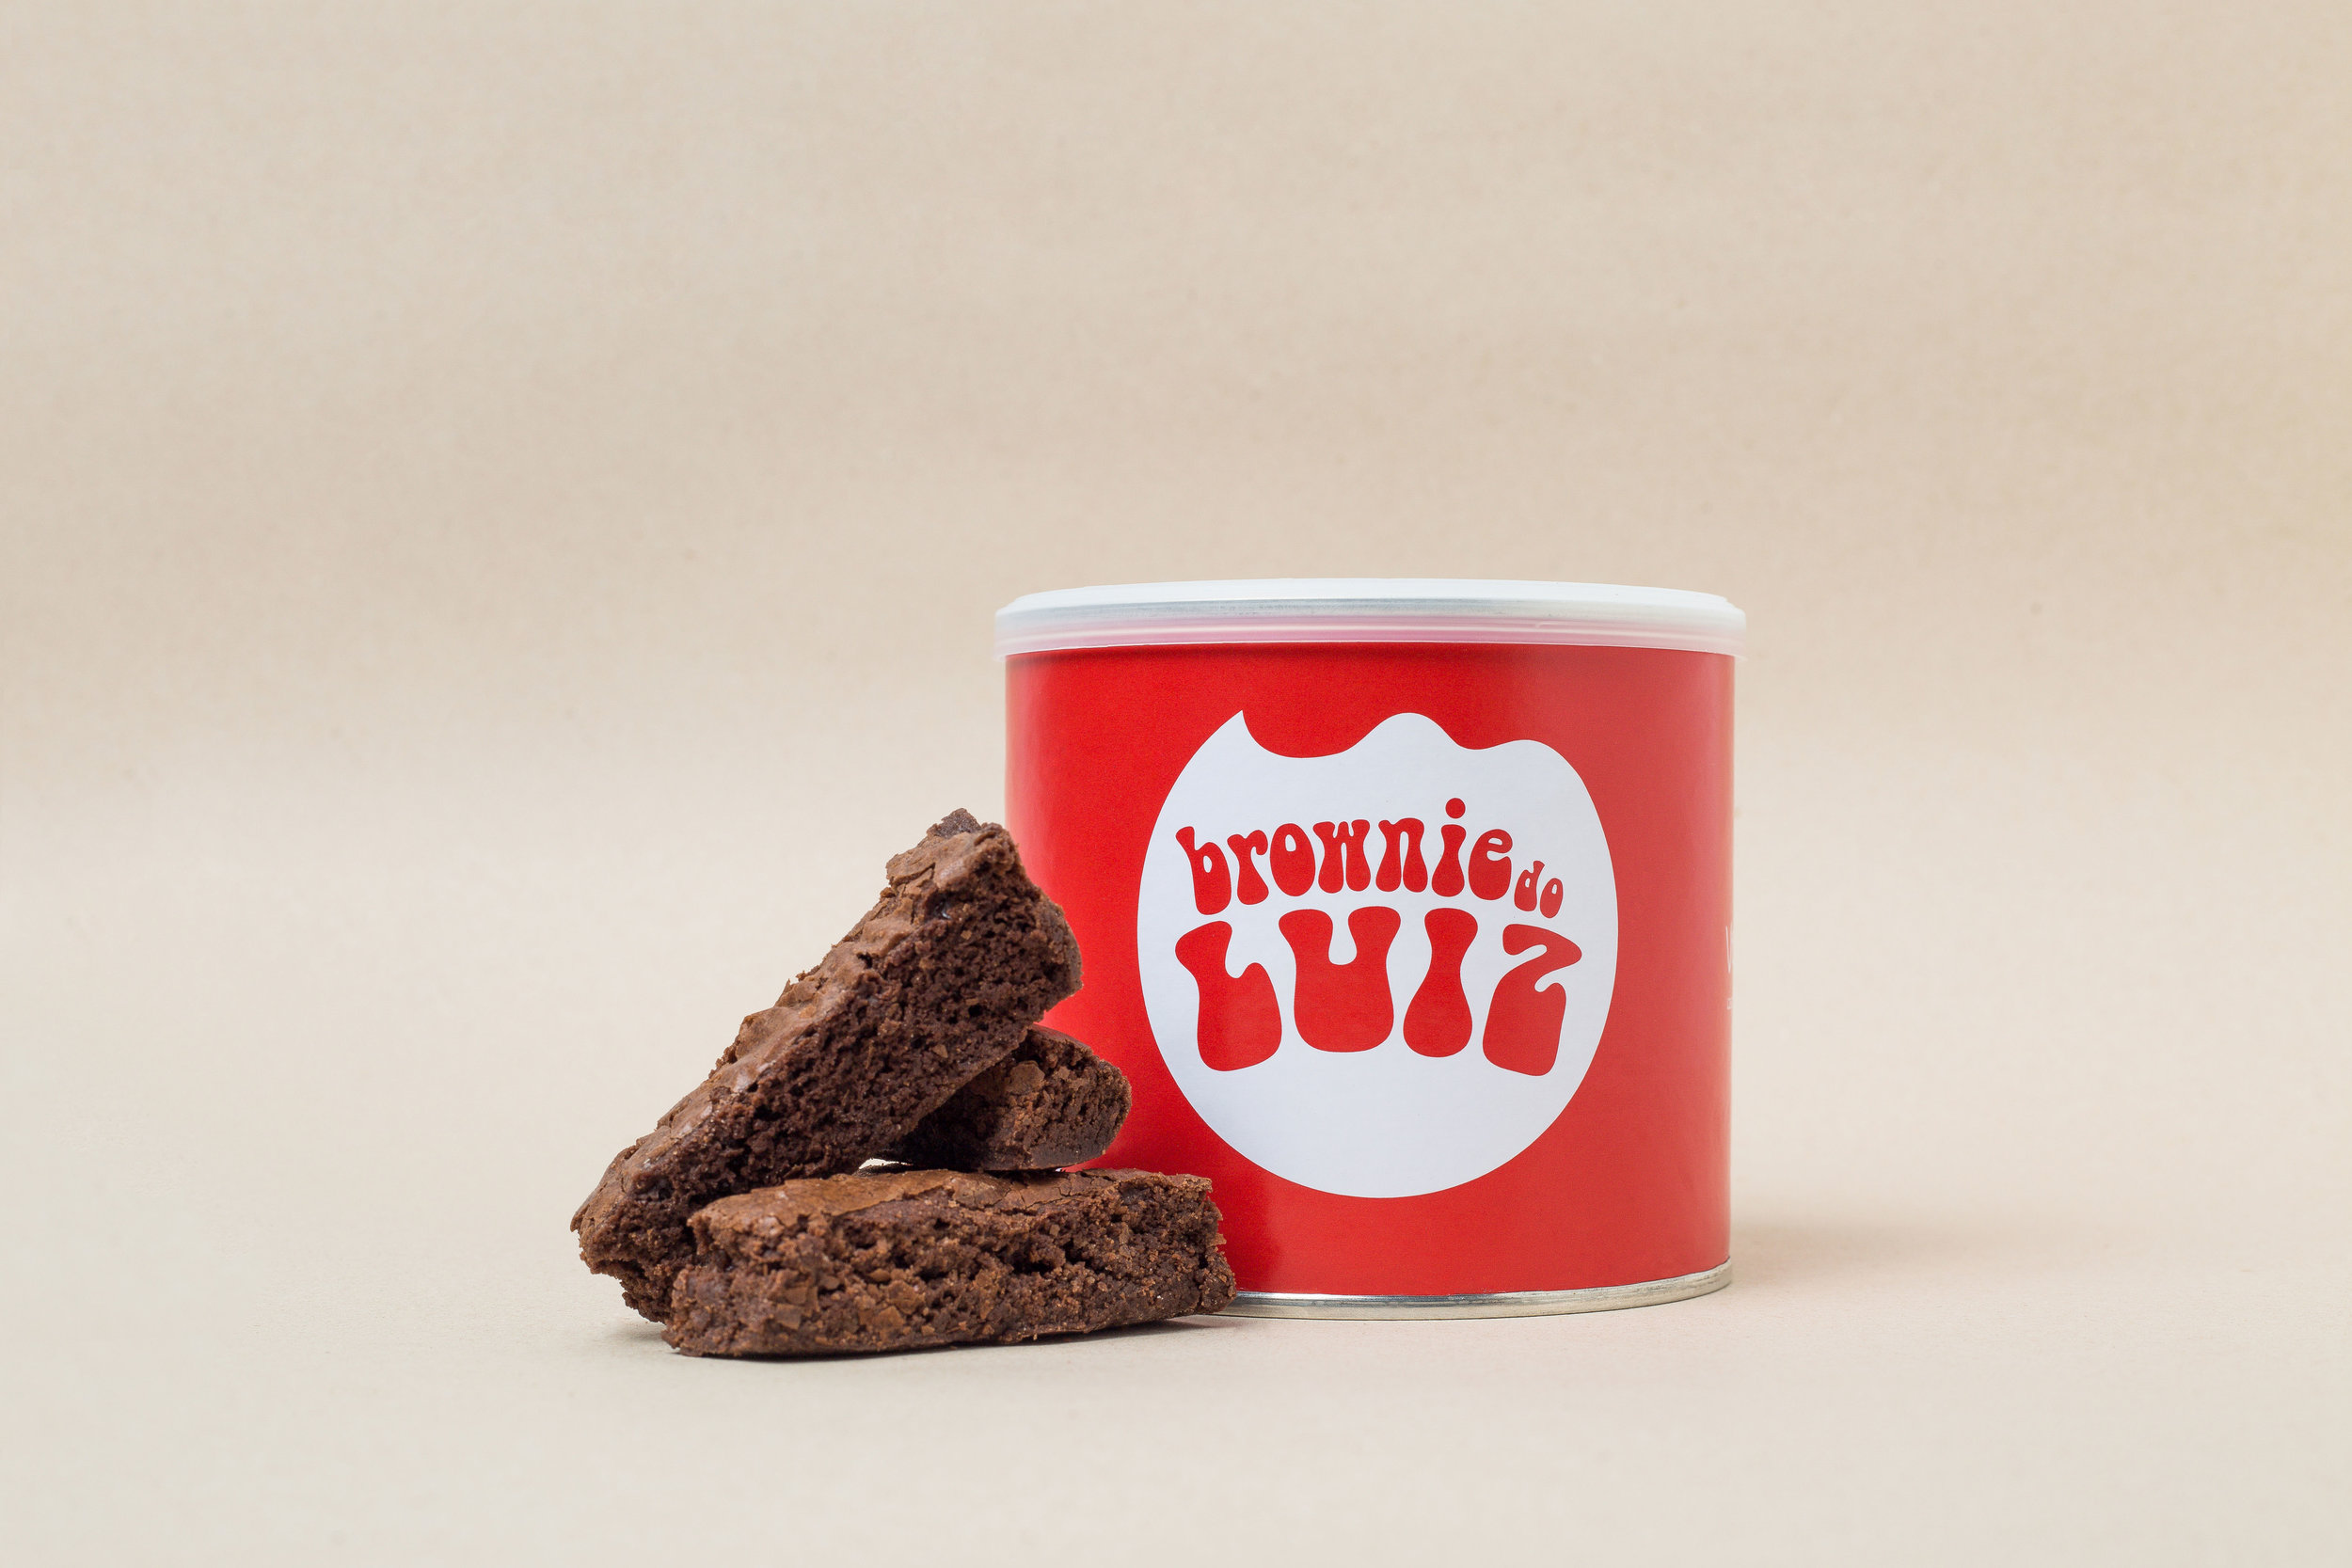 Concept for the Most Chill Chocolate Brownies in Brazil